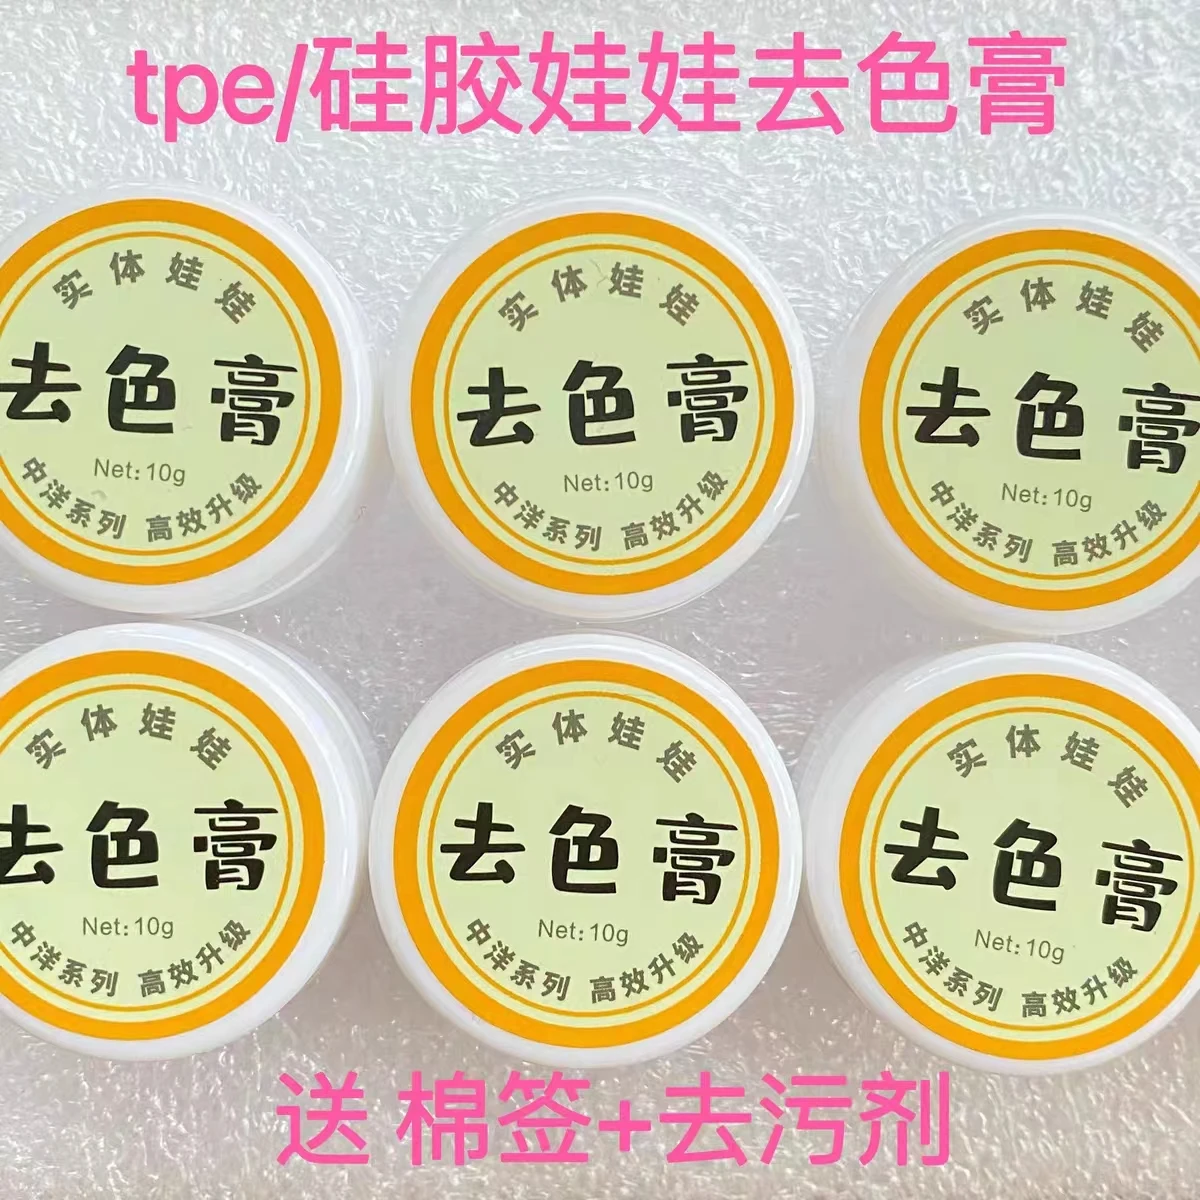 TPE Doll Cleaning Cream, Removing Impurities And Stains On The Surface Of Physical Dolls, Restoring The Original Color